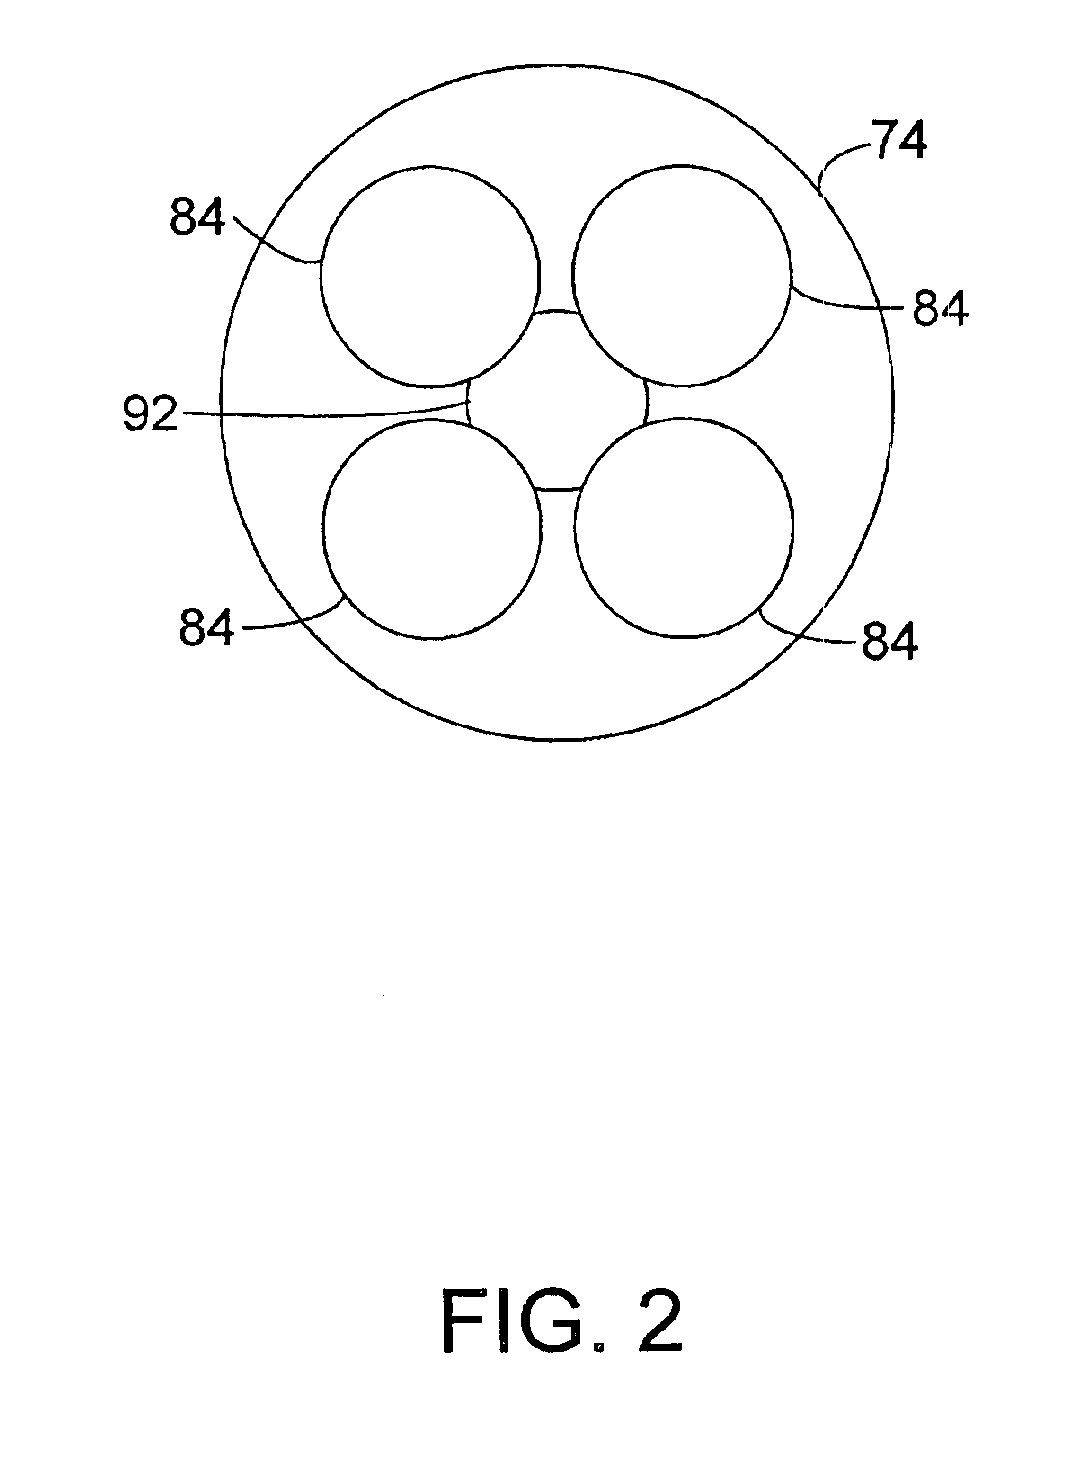 Process and apparatus for upgrading FCC product with additional reactor with catalyst recycle